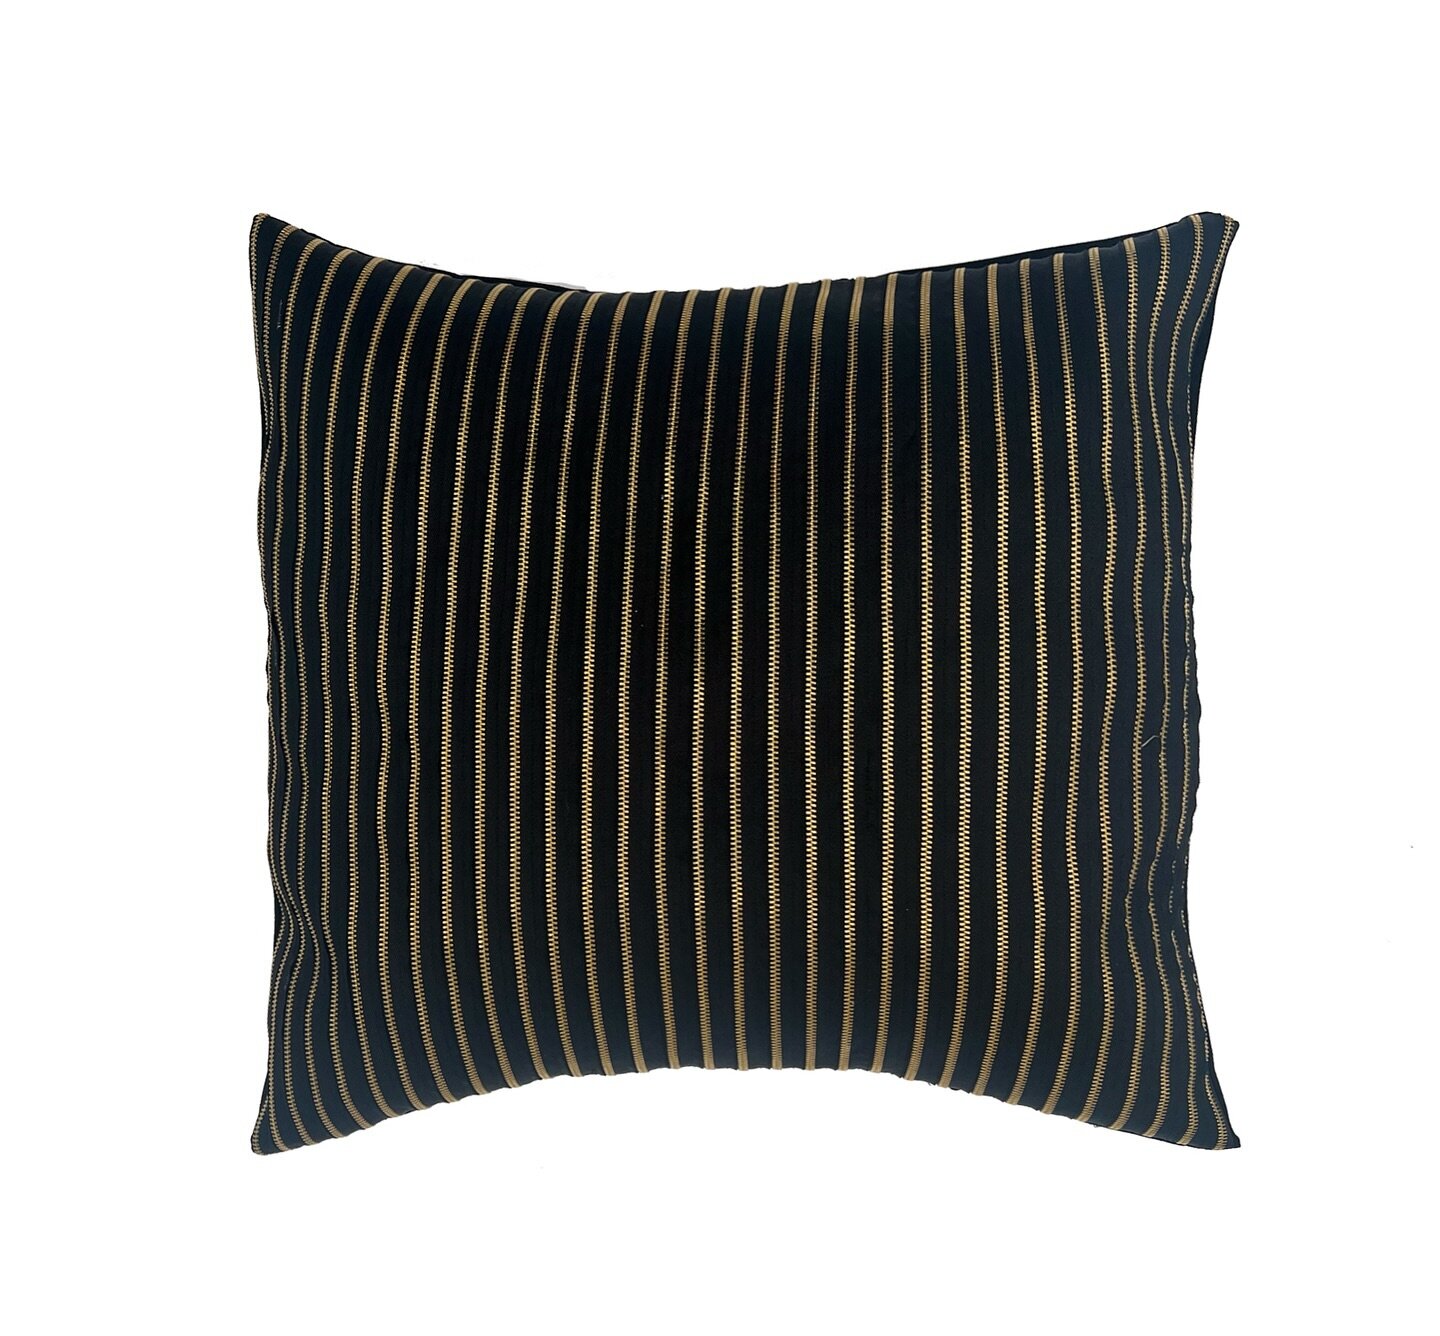 Our CONGO pillow is truly ONE OF A KIND! 
Including: All-over Brass tooth zippers. 
This Decorative pillow will capture any &amp; every eye! 

SHOP NOW AT PILLOVATE.COM